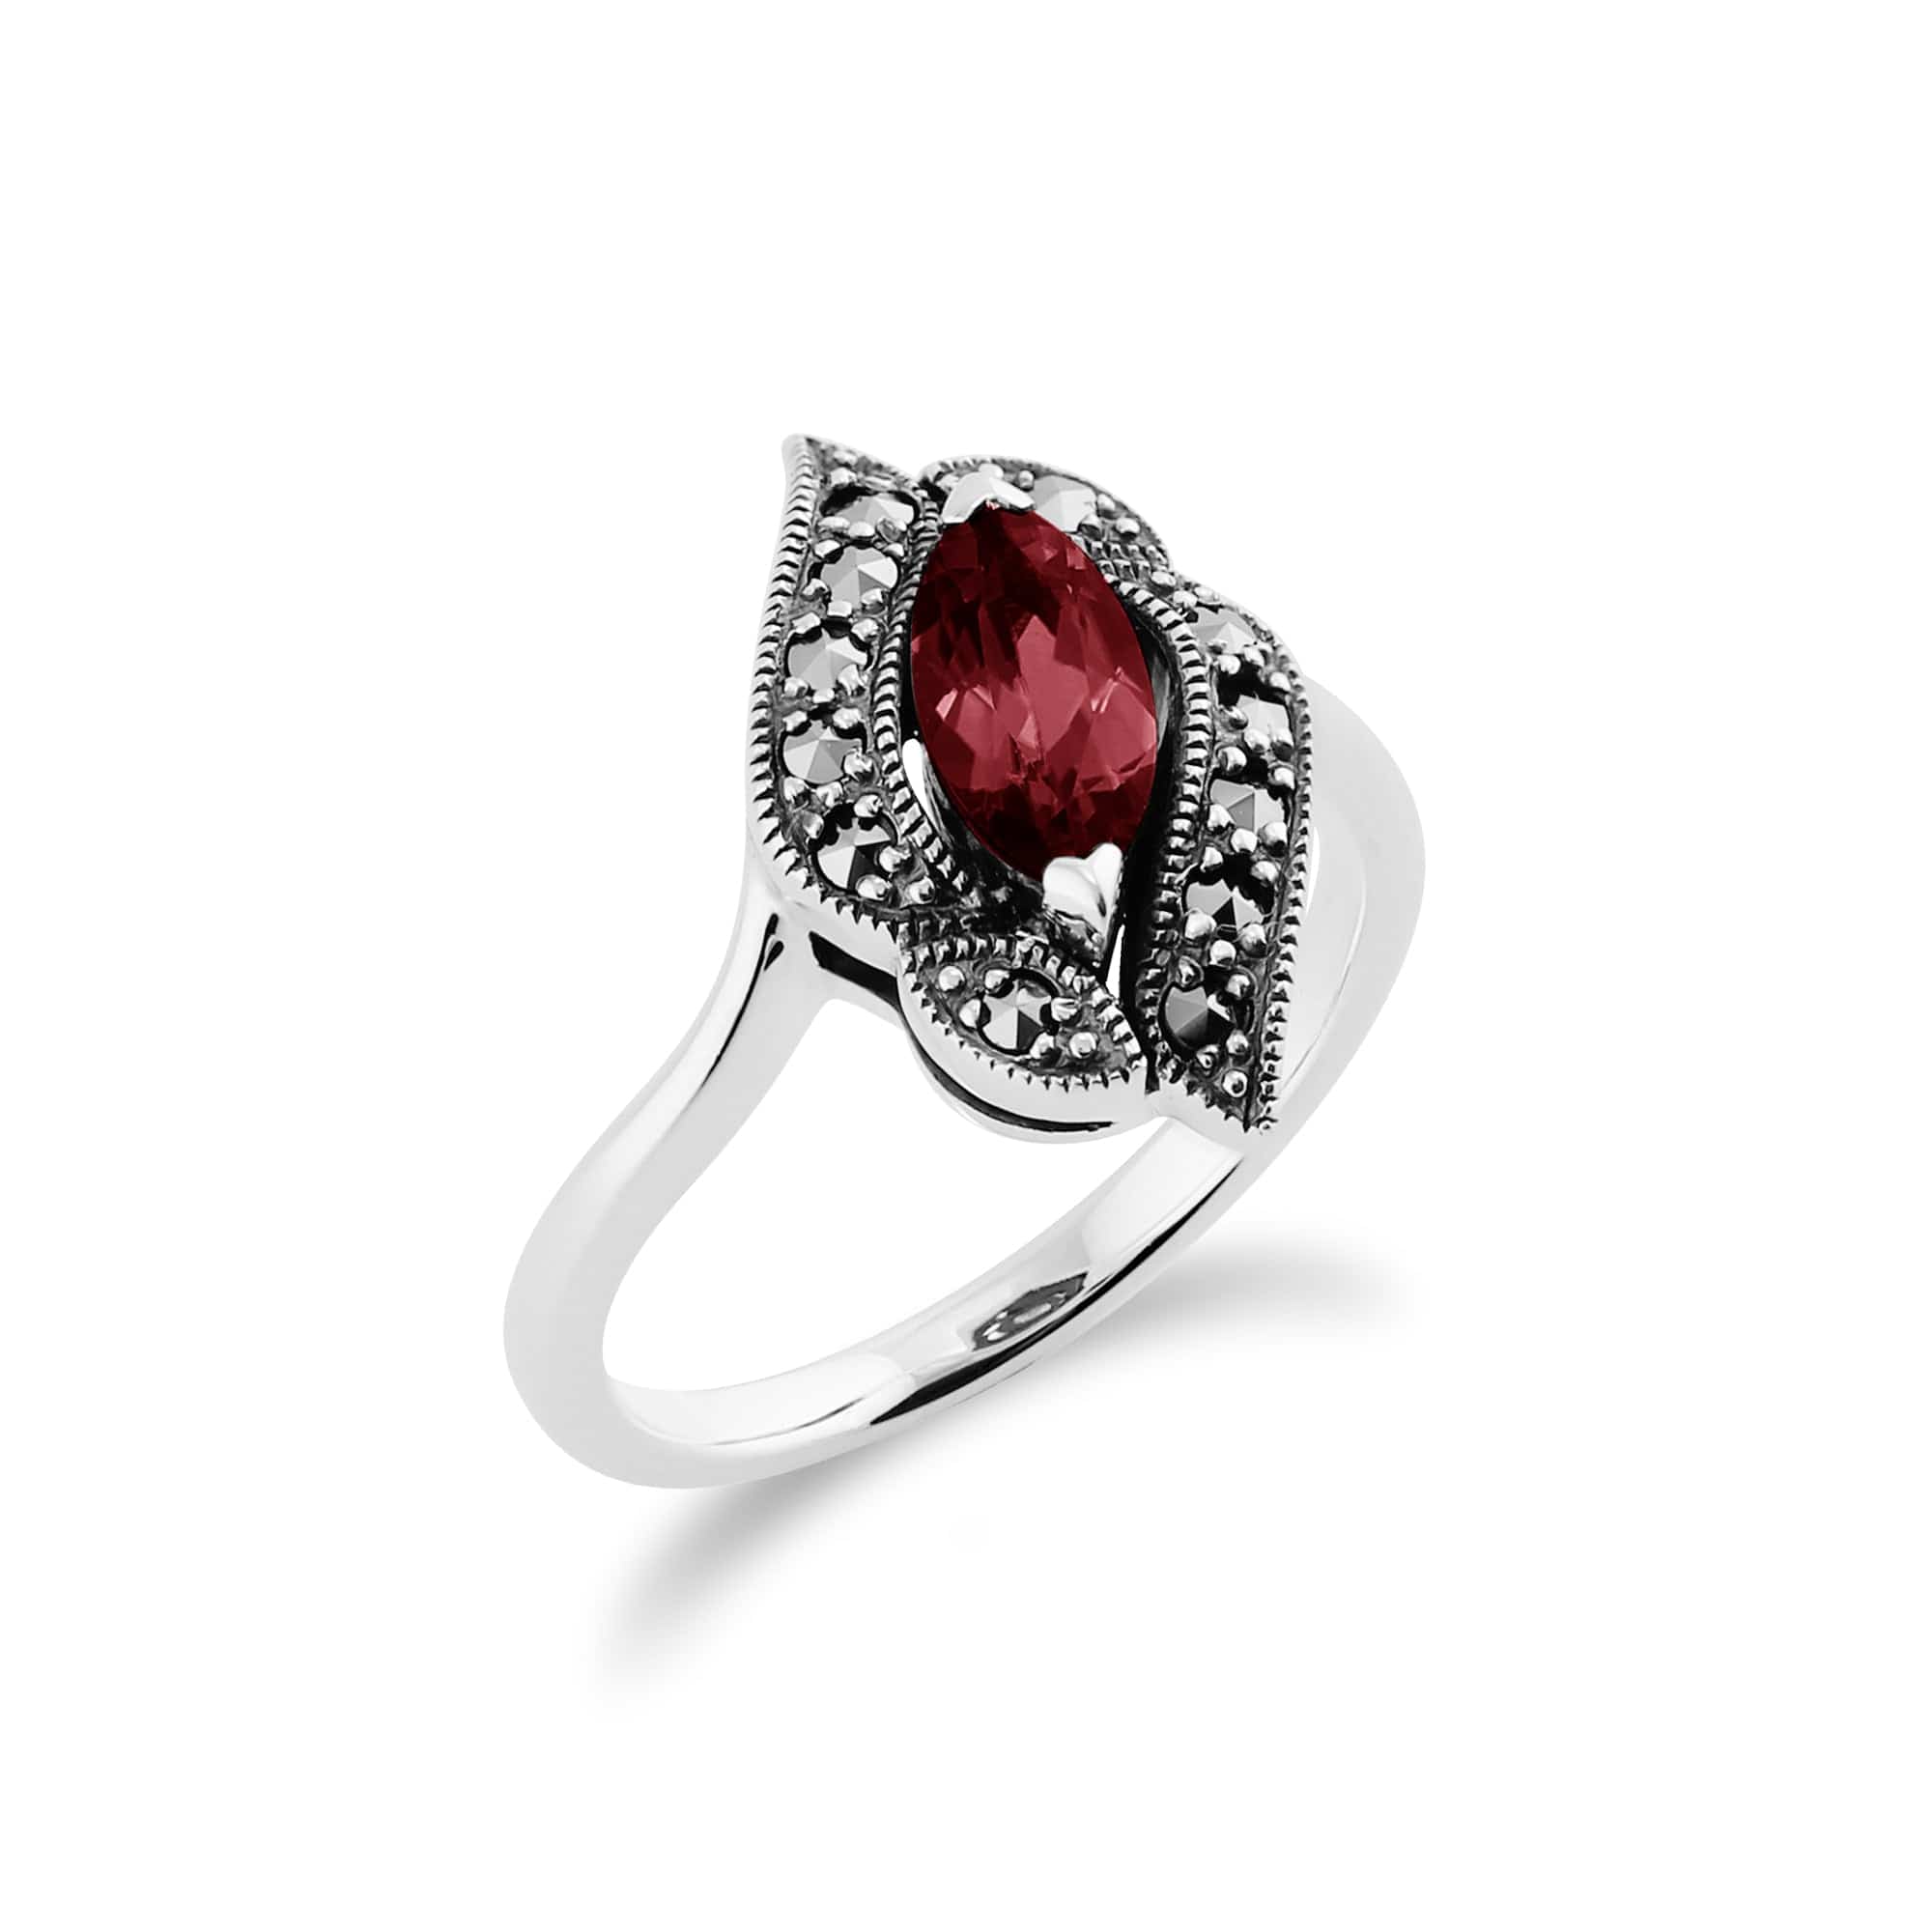 214R392606925 Art Nouveau Style Marquise Garnet & Marcasite Ring in 925 Sterling Silver 2